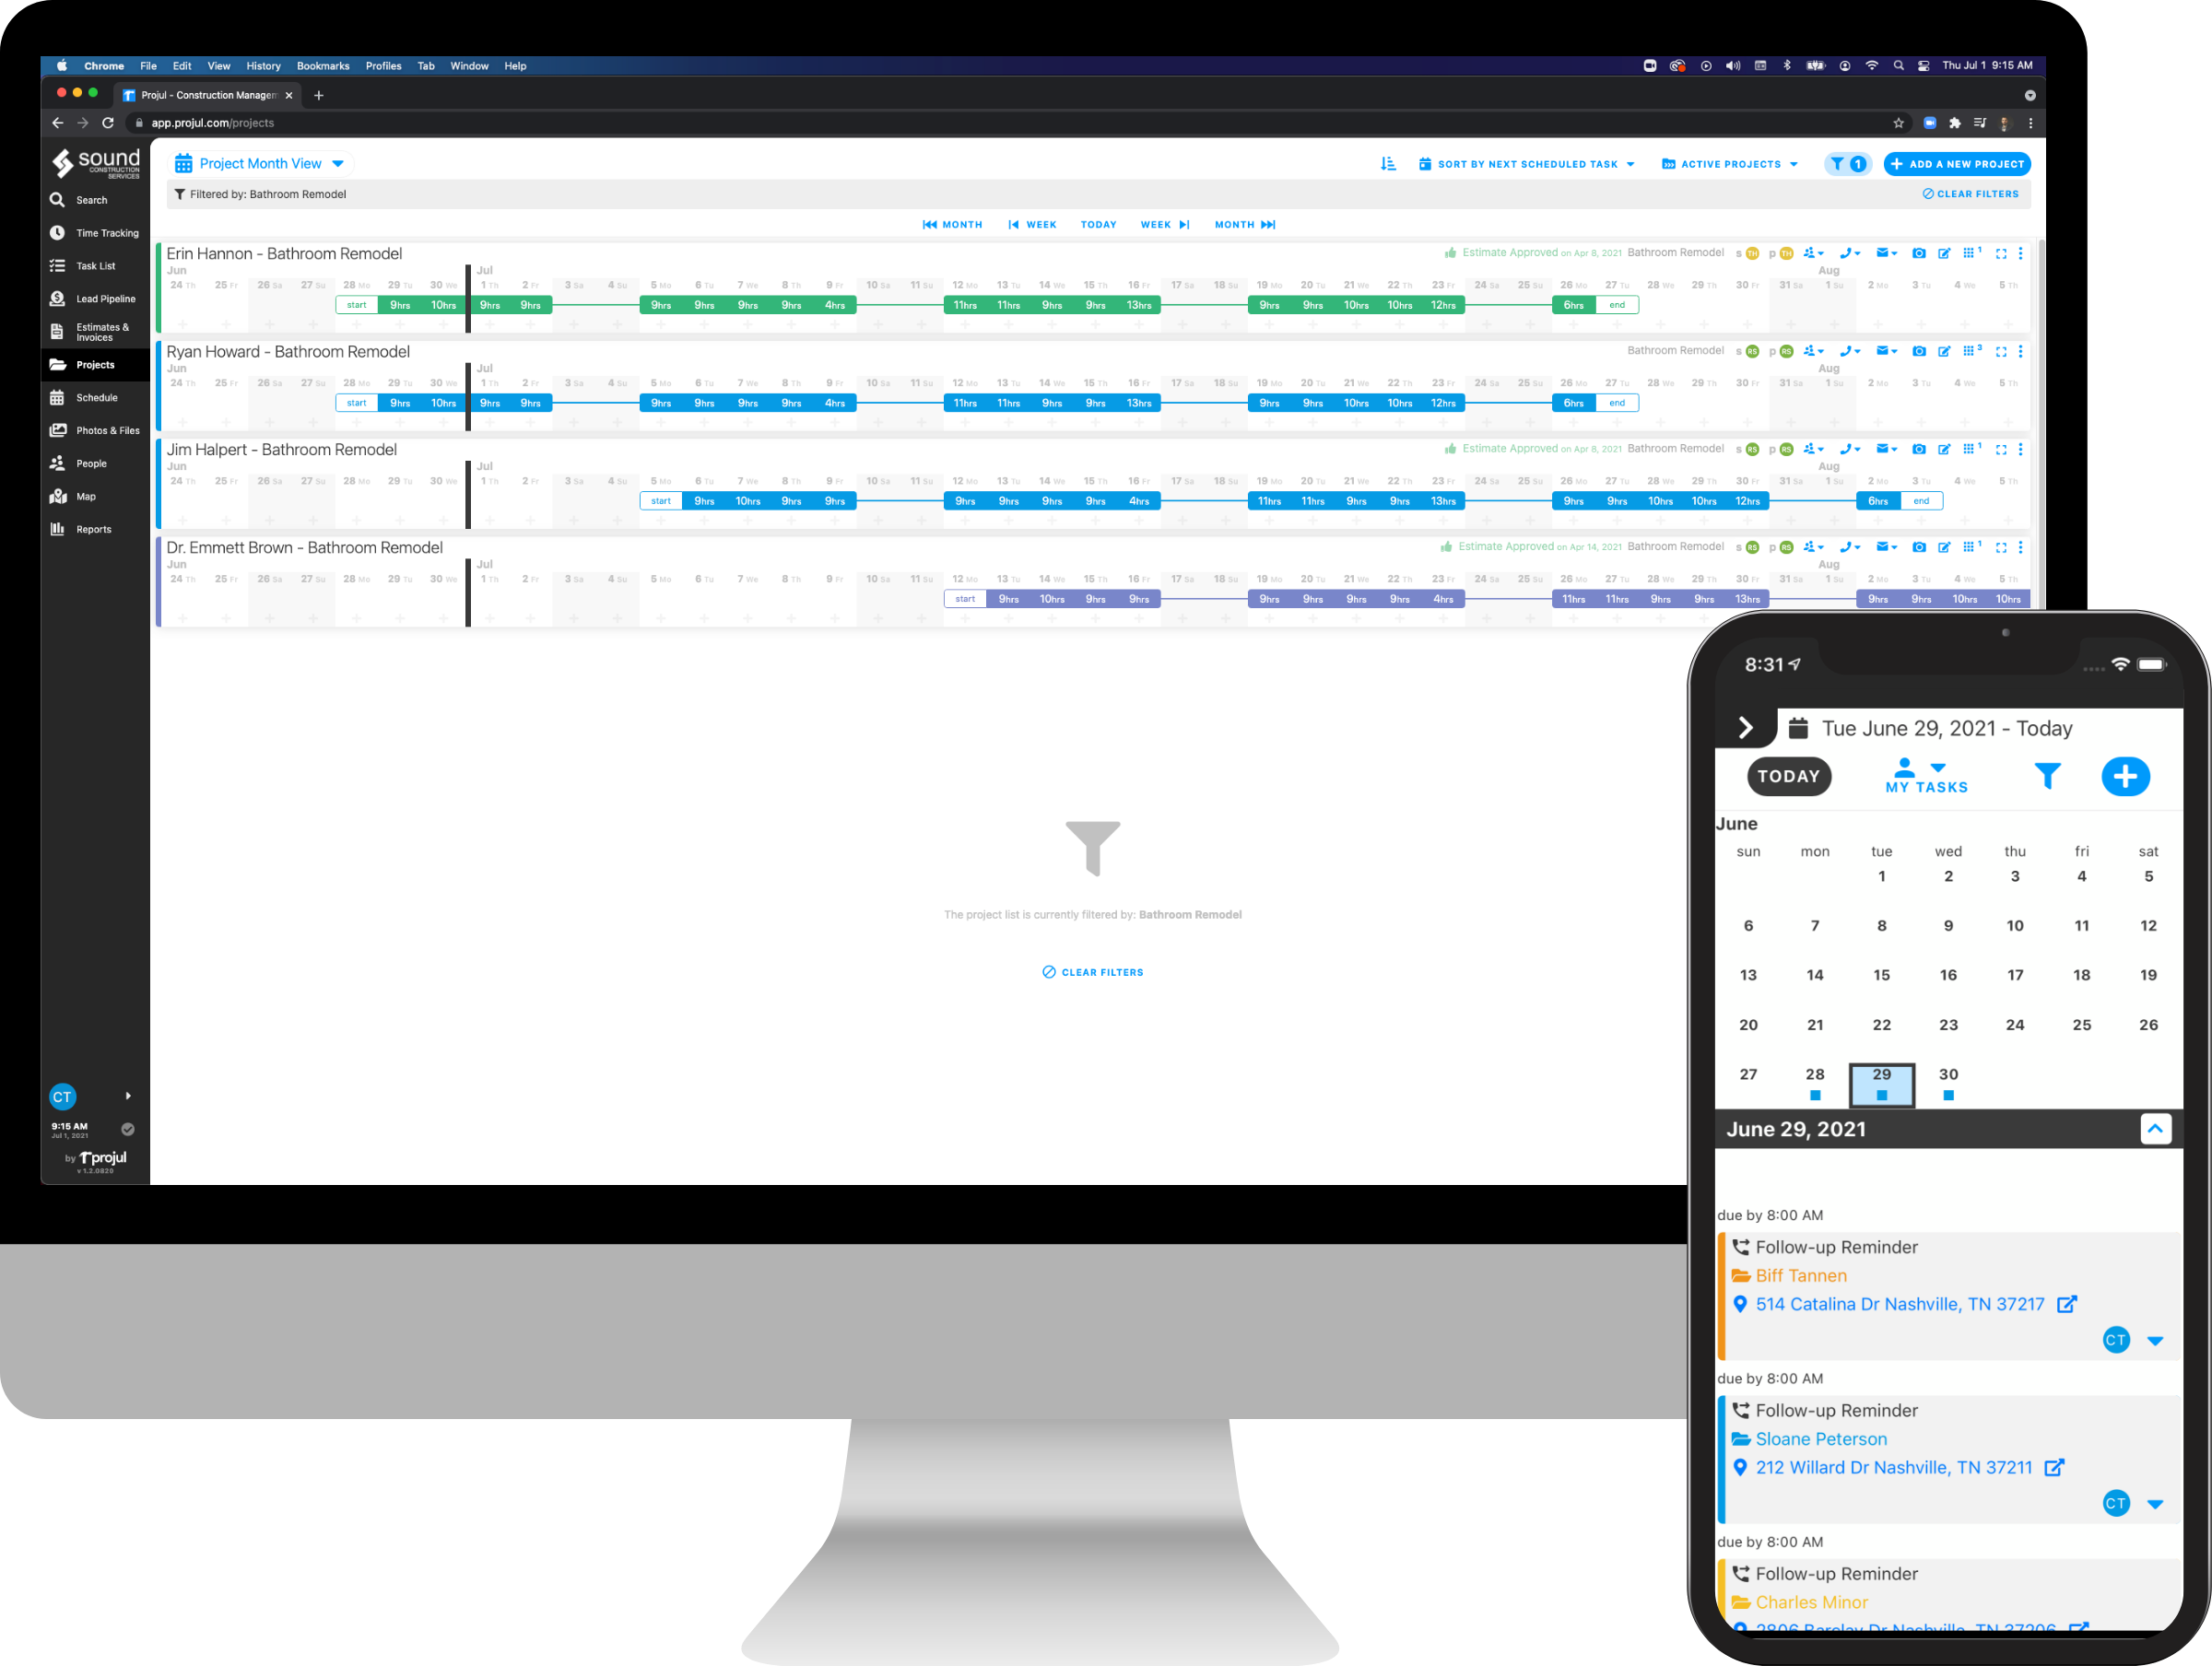 Projul offers SEVEN different schedules so that everyone on your team can find a view they’re comfortable with. Featuring both project-specific schedules (timeline, month view, gantt) and people-specific schedules (day, week, month, calendar).